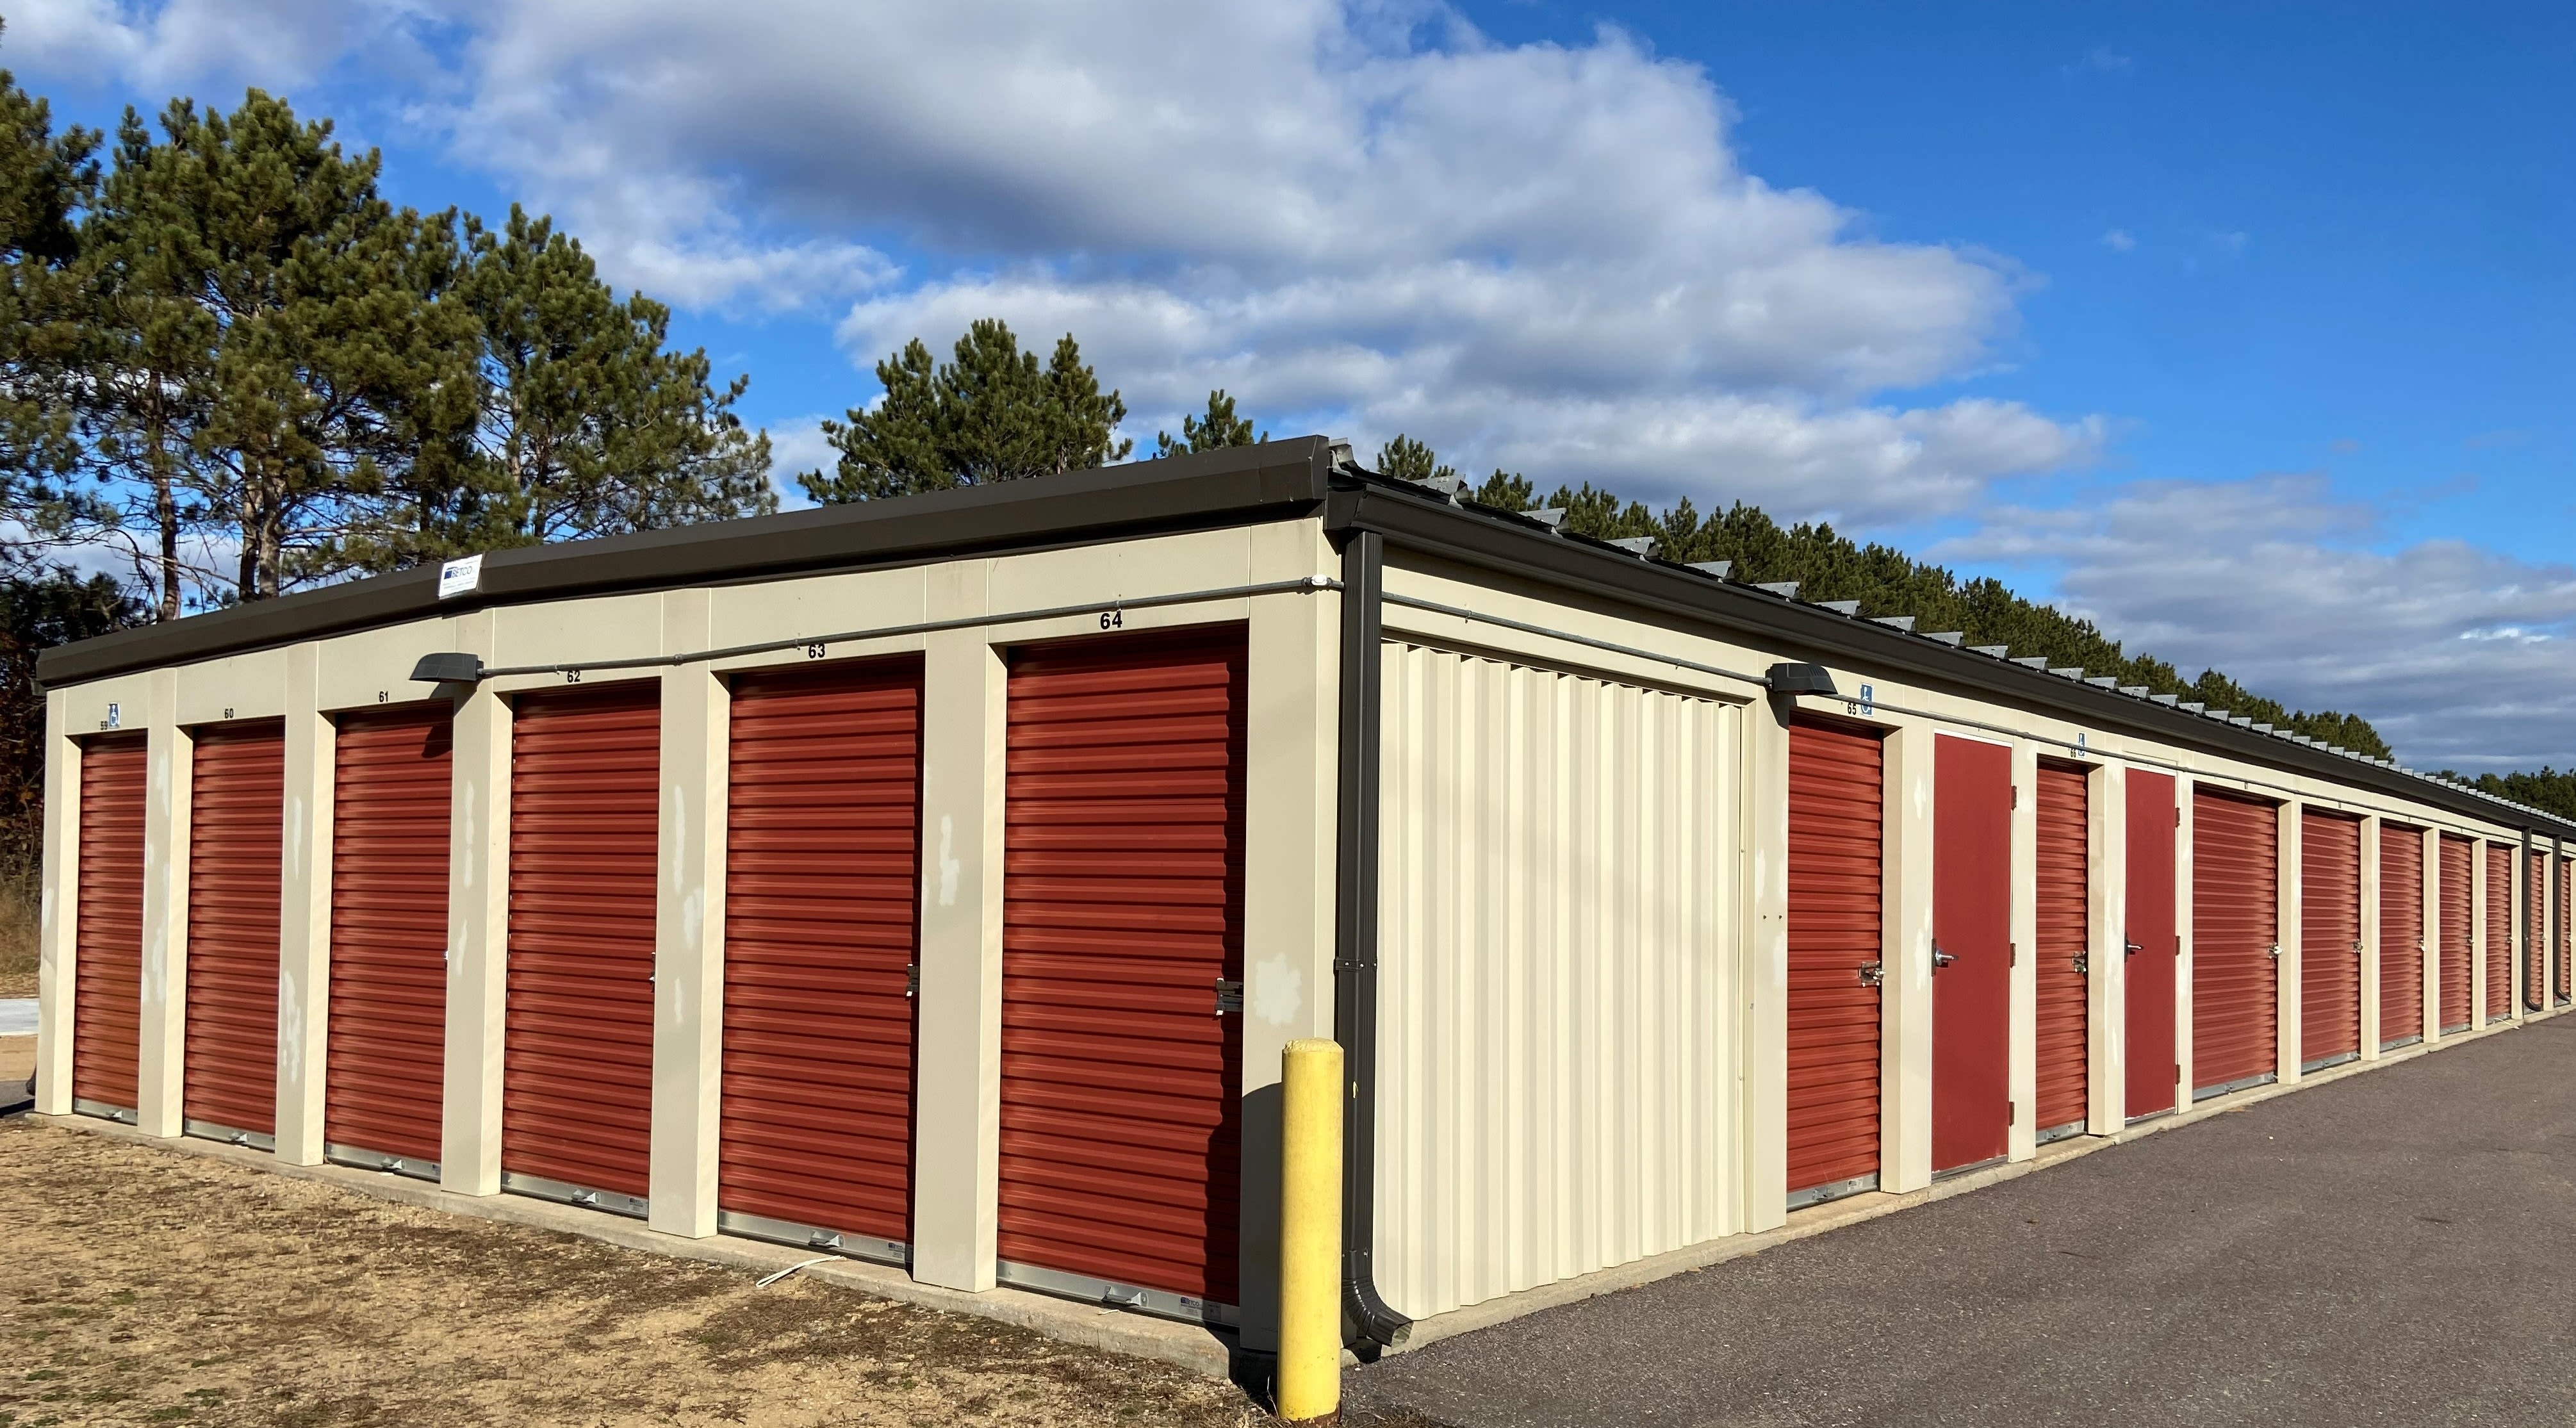 Unit sizes and prices at KO Storage in Wisconsin Dells, Wisconsin